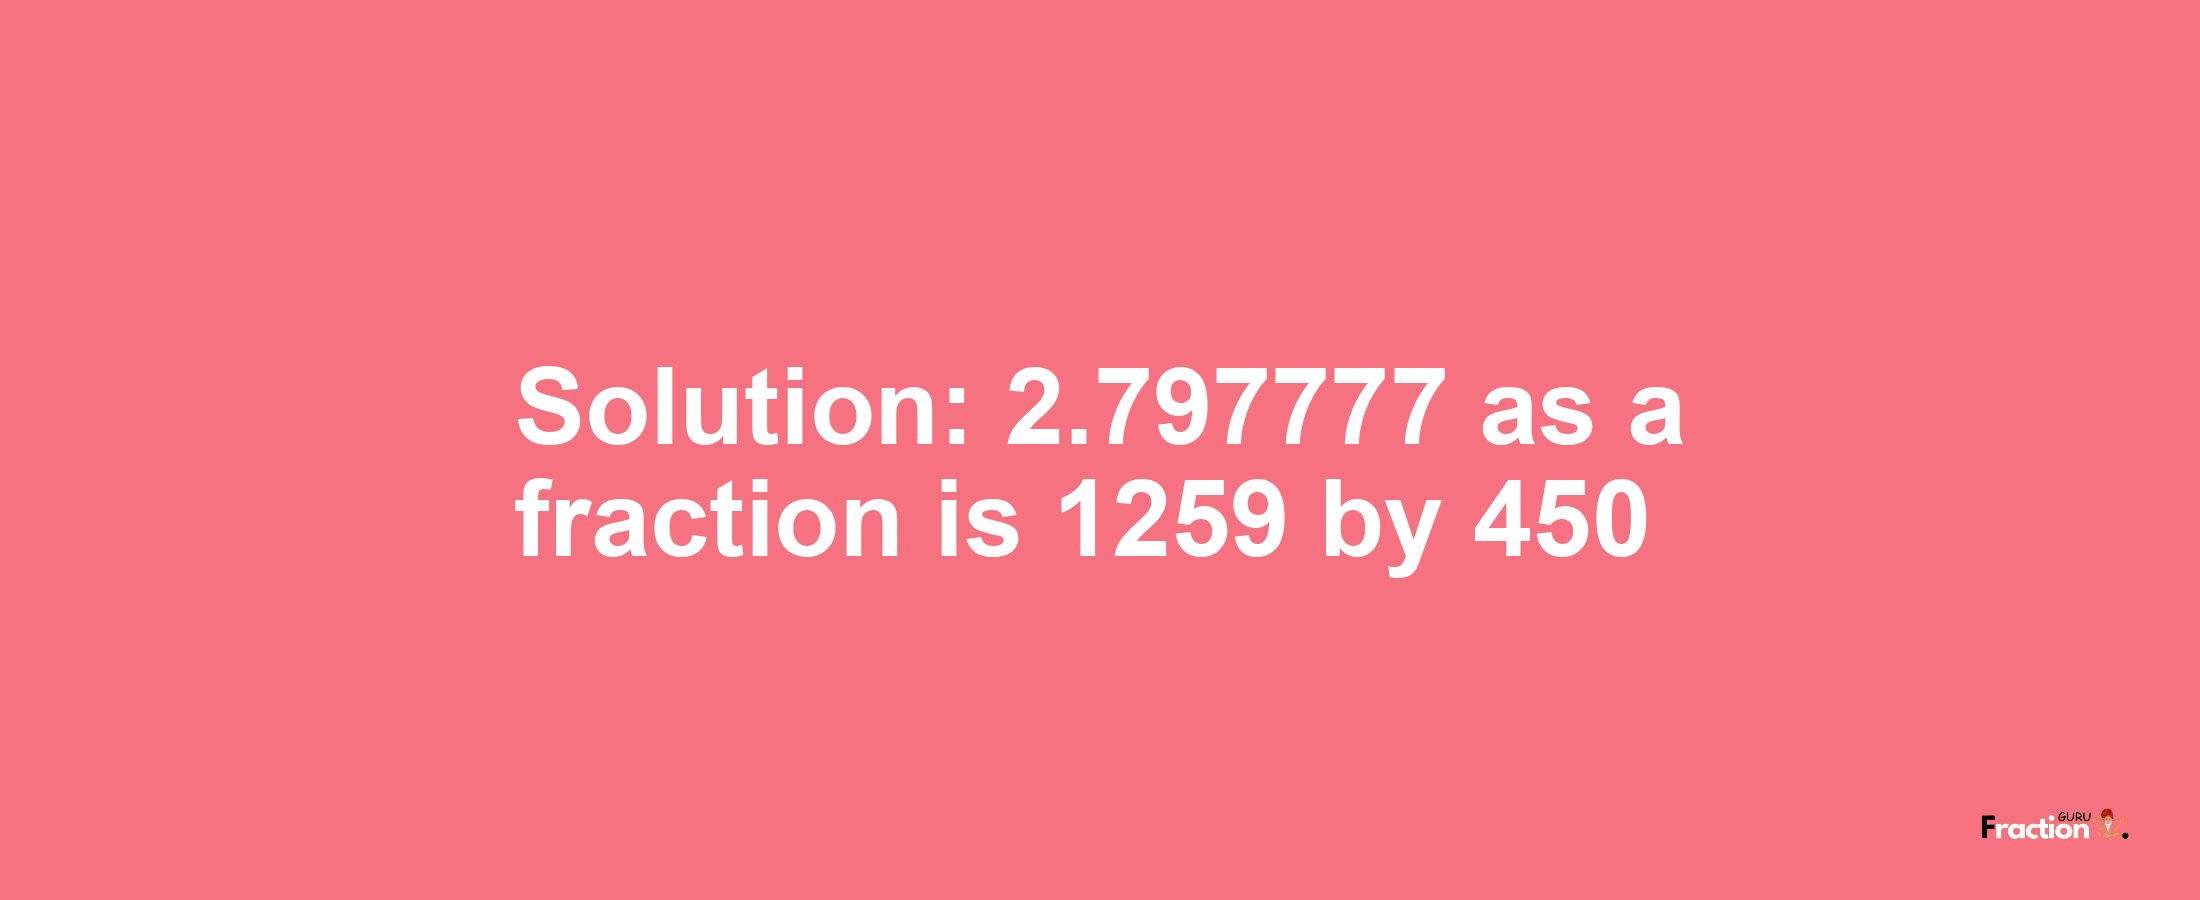 Solution:2.797777 as a fraction is 1259/450